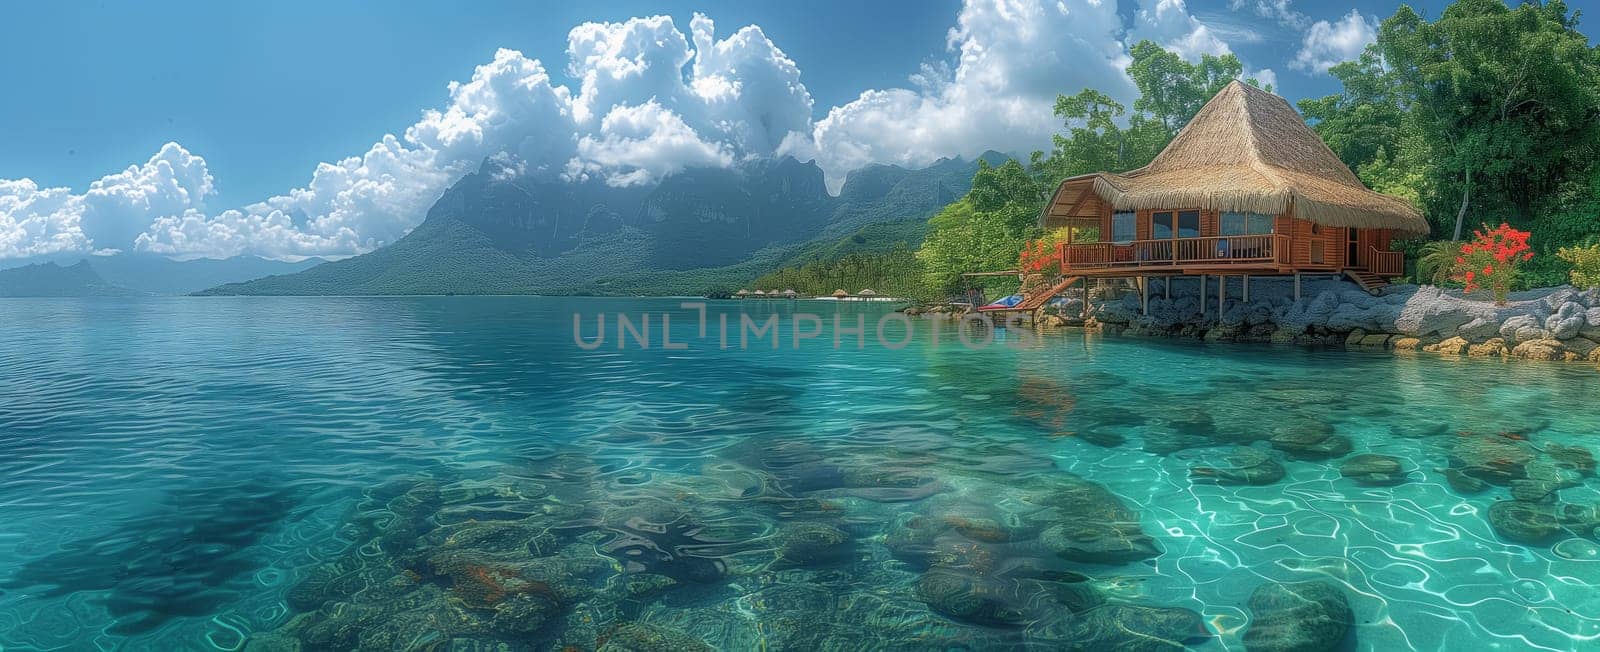 A solitary hut sits amidst the vast expanse of the ocean, surrounded by nothing but water, sky, and fluffy cumulus clouds. A majestic and peaceful natural landscape